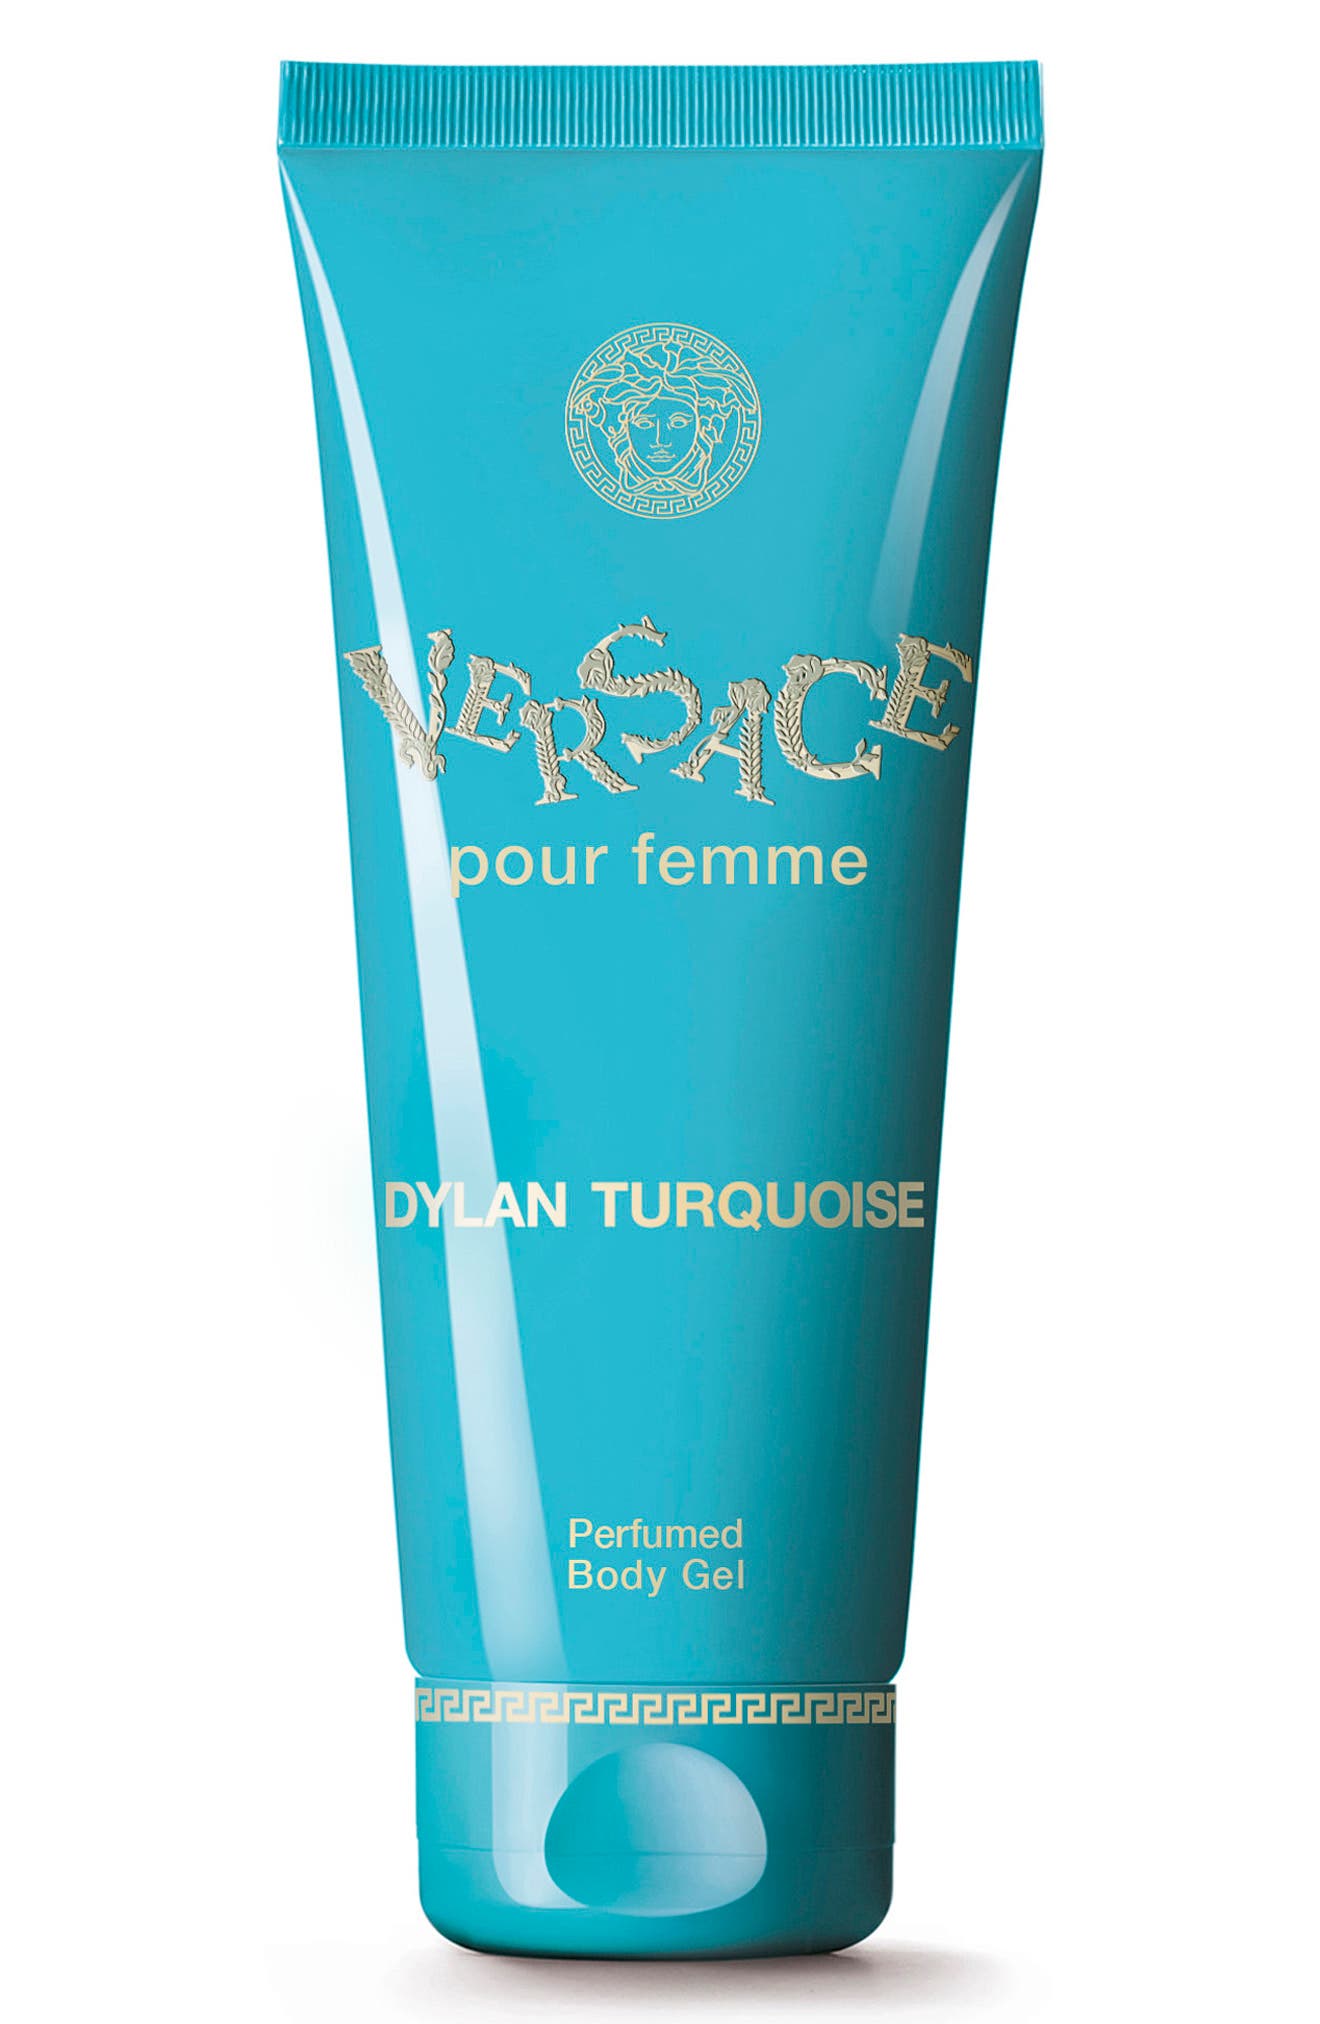 Versace Dylan Turquoise Perfumed Body Gel at Nordstrom, Size 6.7 Oz